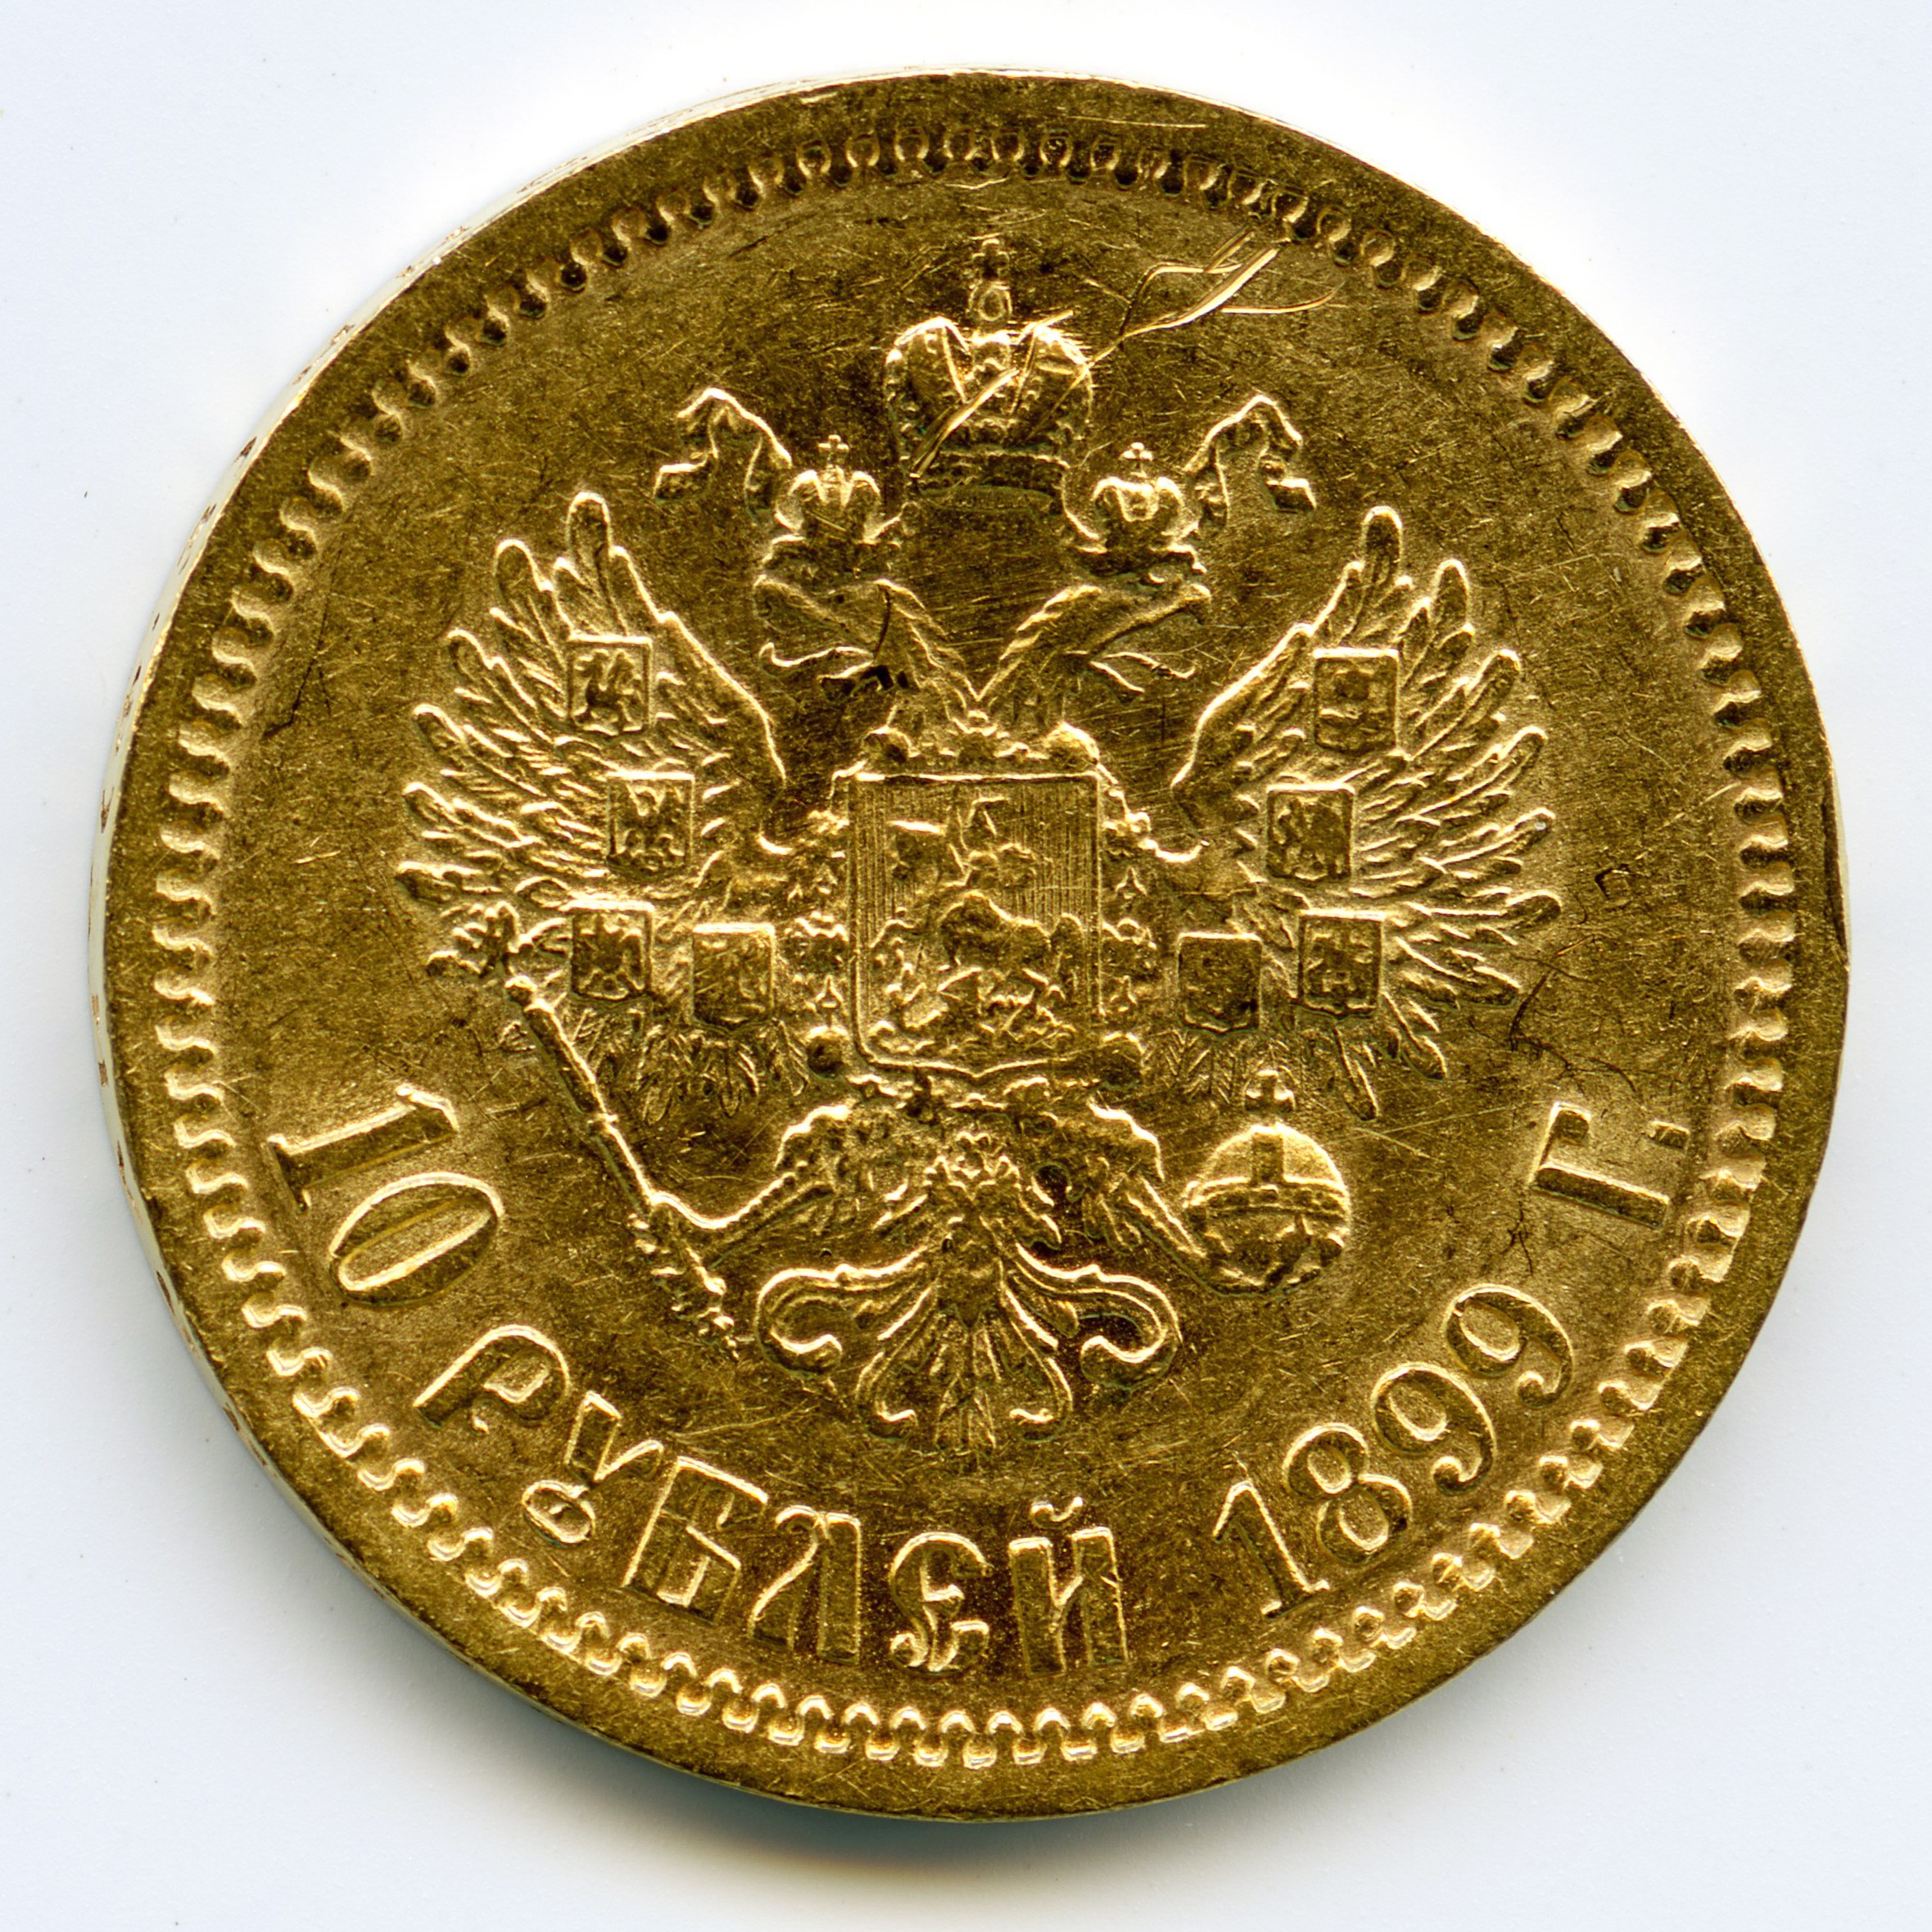 Russie - 10 Roubles - 1899 revers